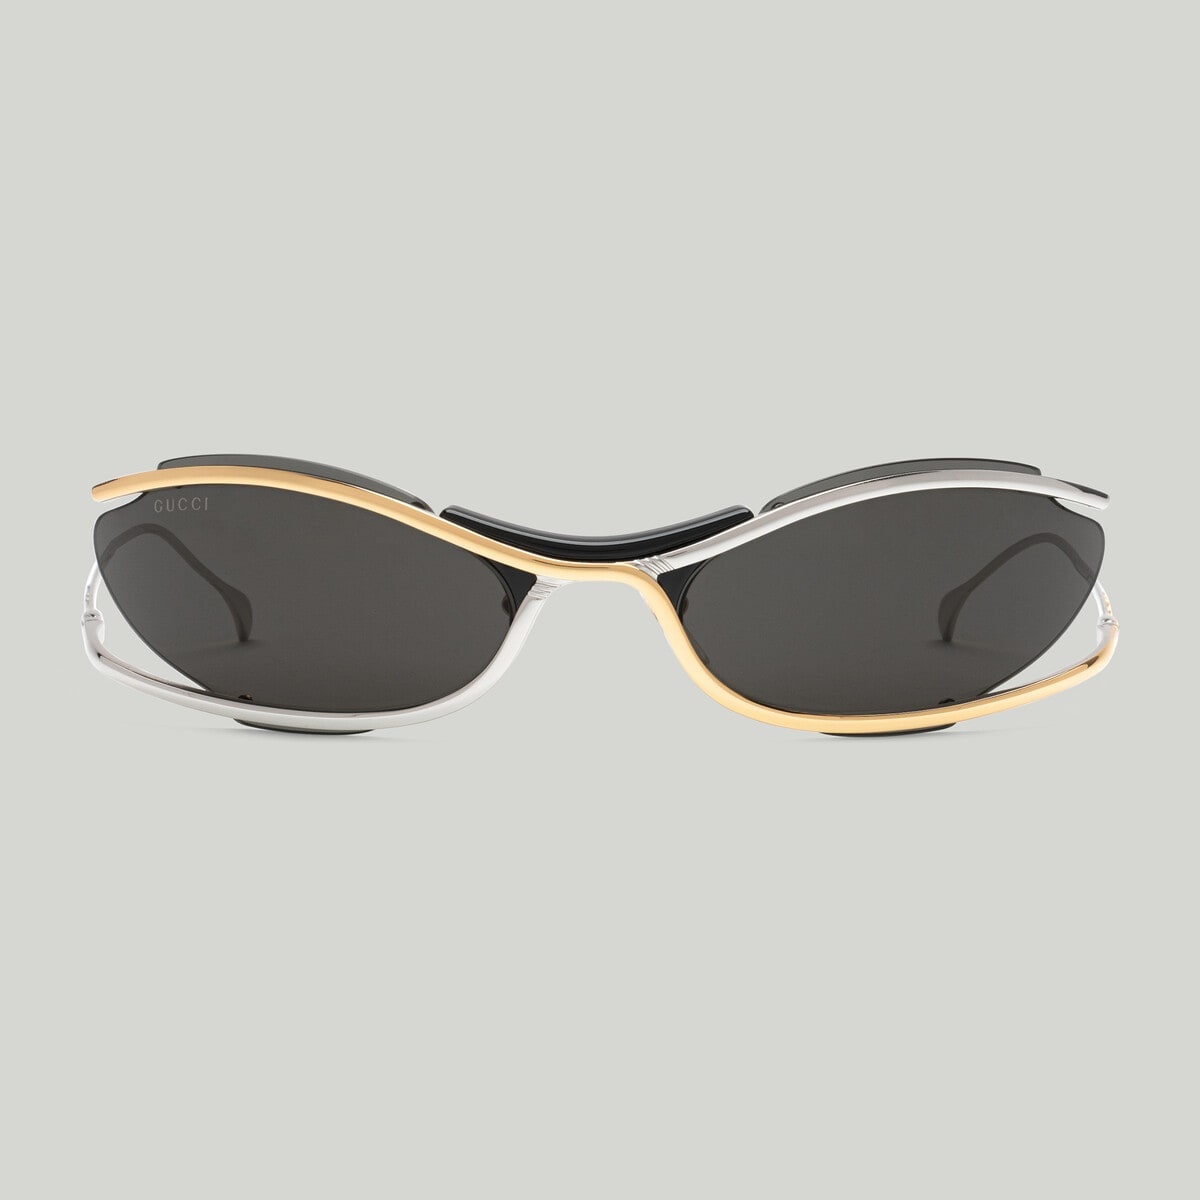 GUCCI Oval frame sunglasses | REVERSIBLE